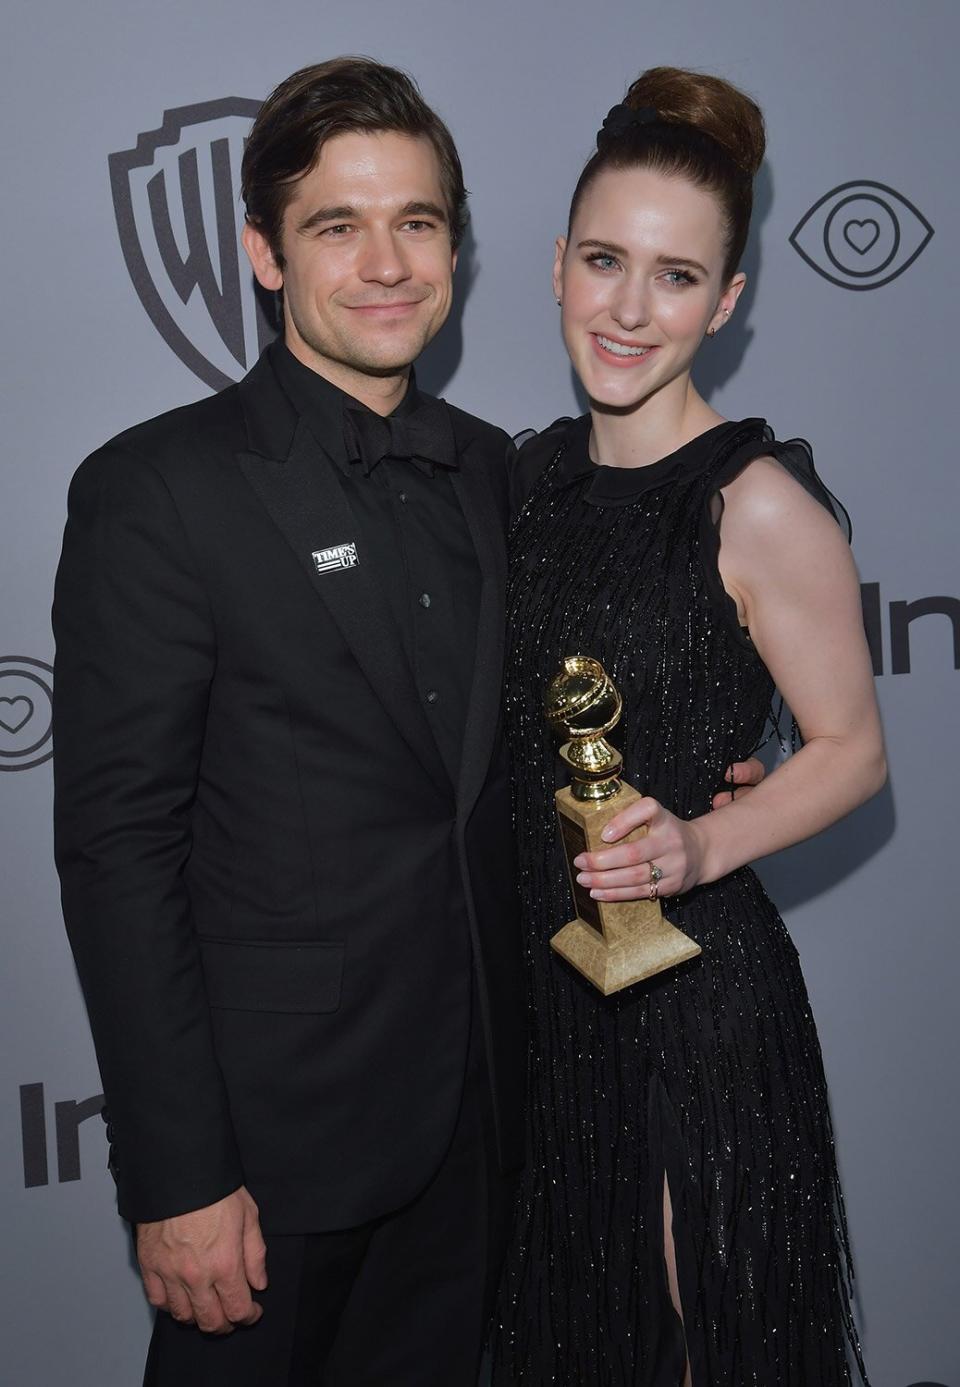 BEVERLY HILLS, CA - JANUARY 07: Actors Jason Ralph (L) and Rachel Brosnahan attends 19th Annual Post-Golden Globes Party hosted by Warner Bros. Pictures and InStyle at The Beverly Hilton Hotel on January 7, 2018 in Beverly Hills, California. (Photo by Lester Cohen/WireImage)